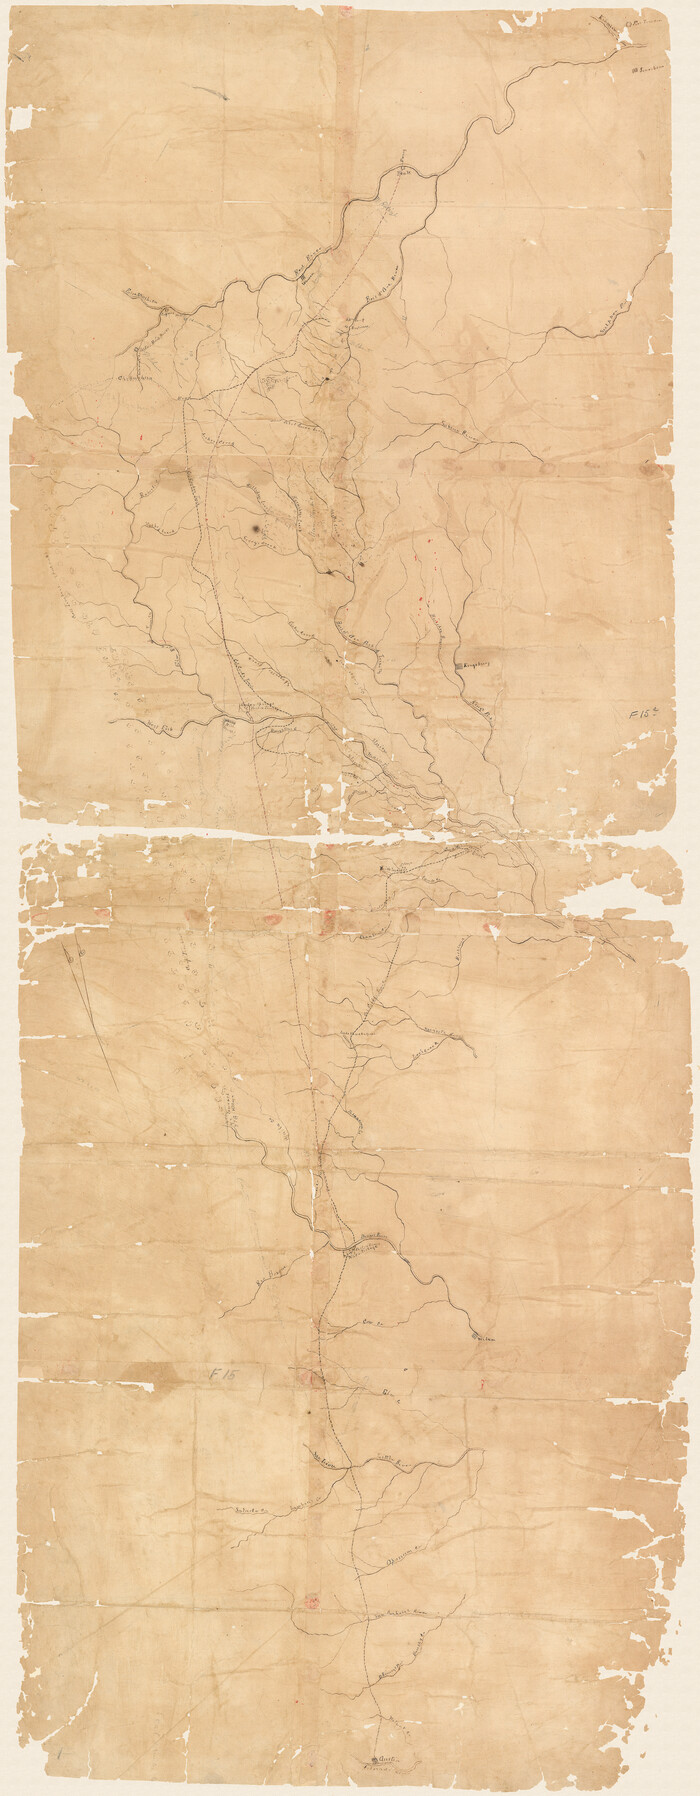 82272, [Sketch of Col. Cooke's Military Road expedition from Red River to Austin], General Map Collection